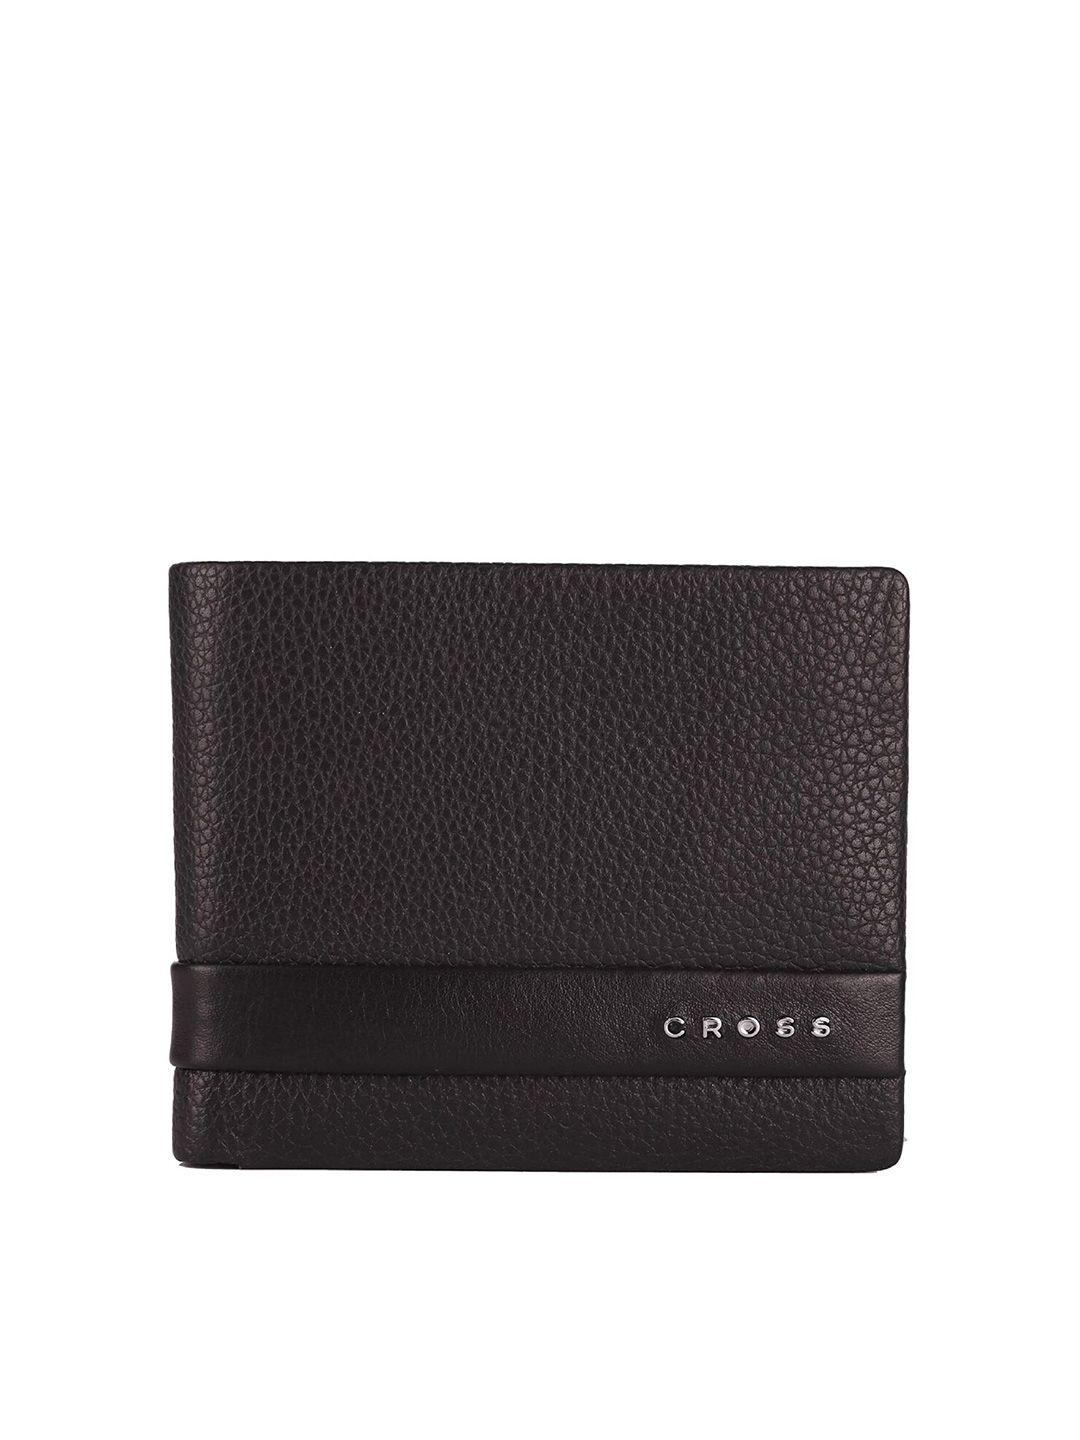 cross men leather two fold wallet with sd card holder